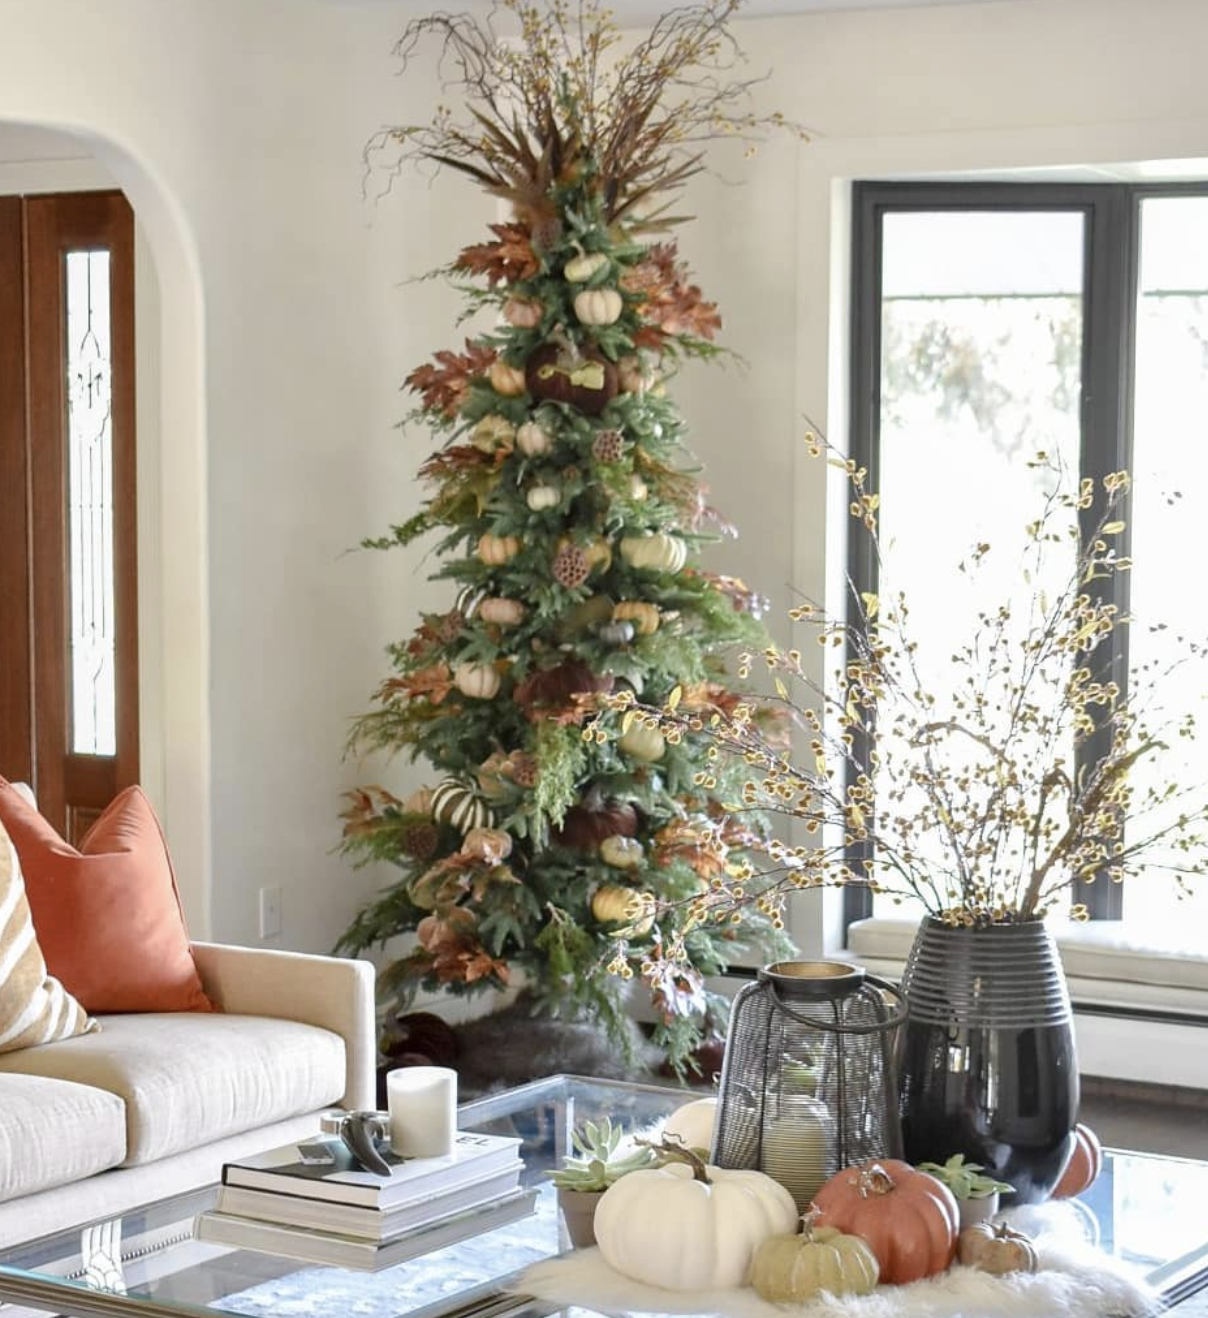 Yes, Thanksgiving Trees Are a Thing. Here's How to Decorate One